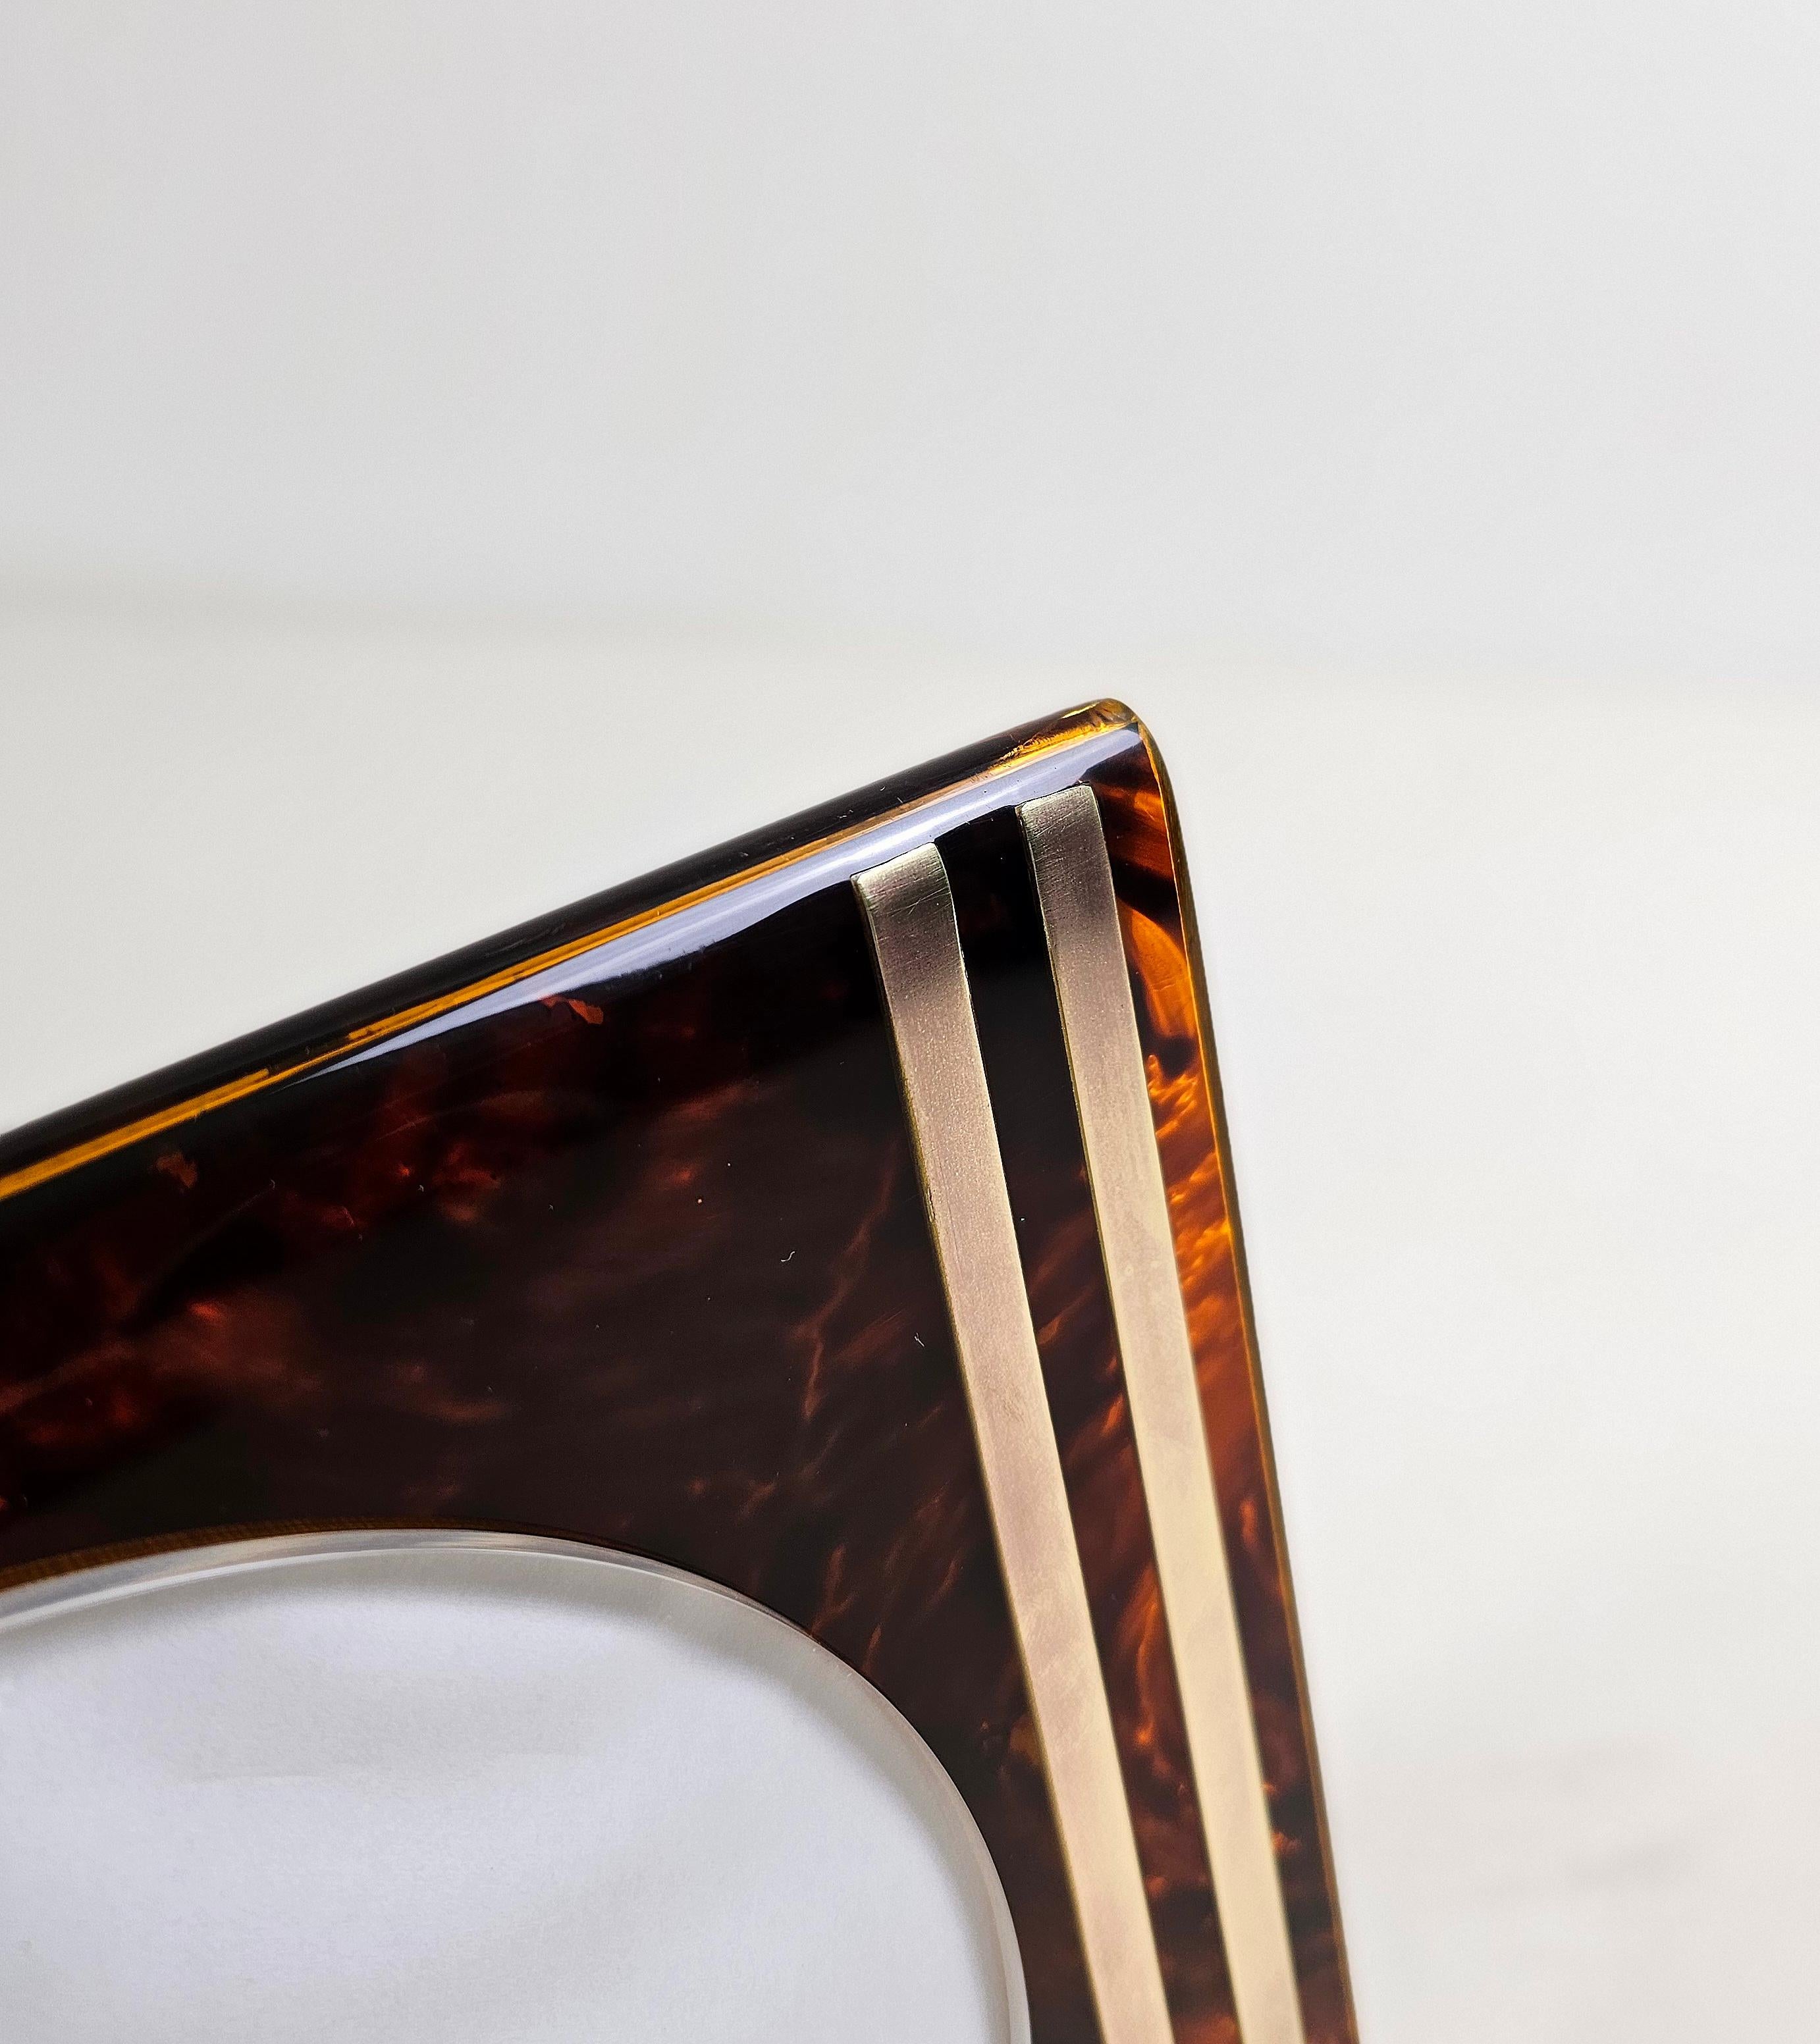 Rectangular frame in lucite and brass designed and produced in Italy Team Guzzini. Lucite material, a type of acrylic resin known for its transparency, historically used for luxury items .Mottled patterns of brown and black, with brass elements,